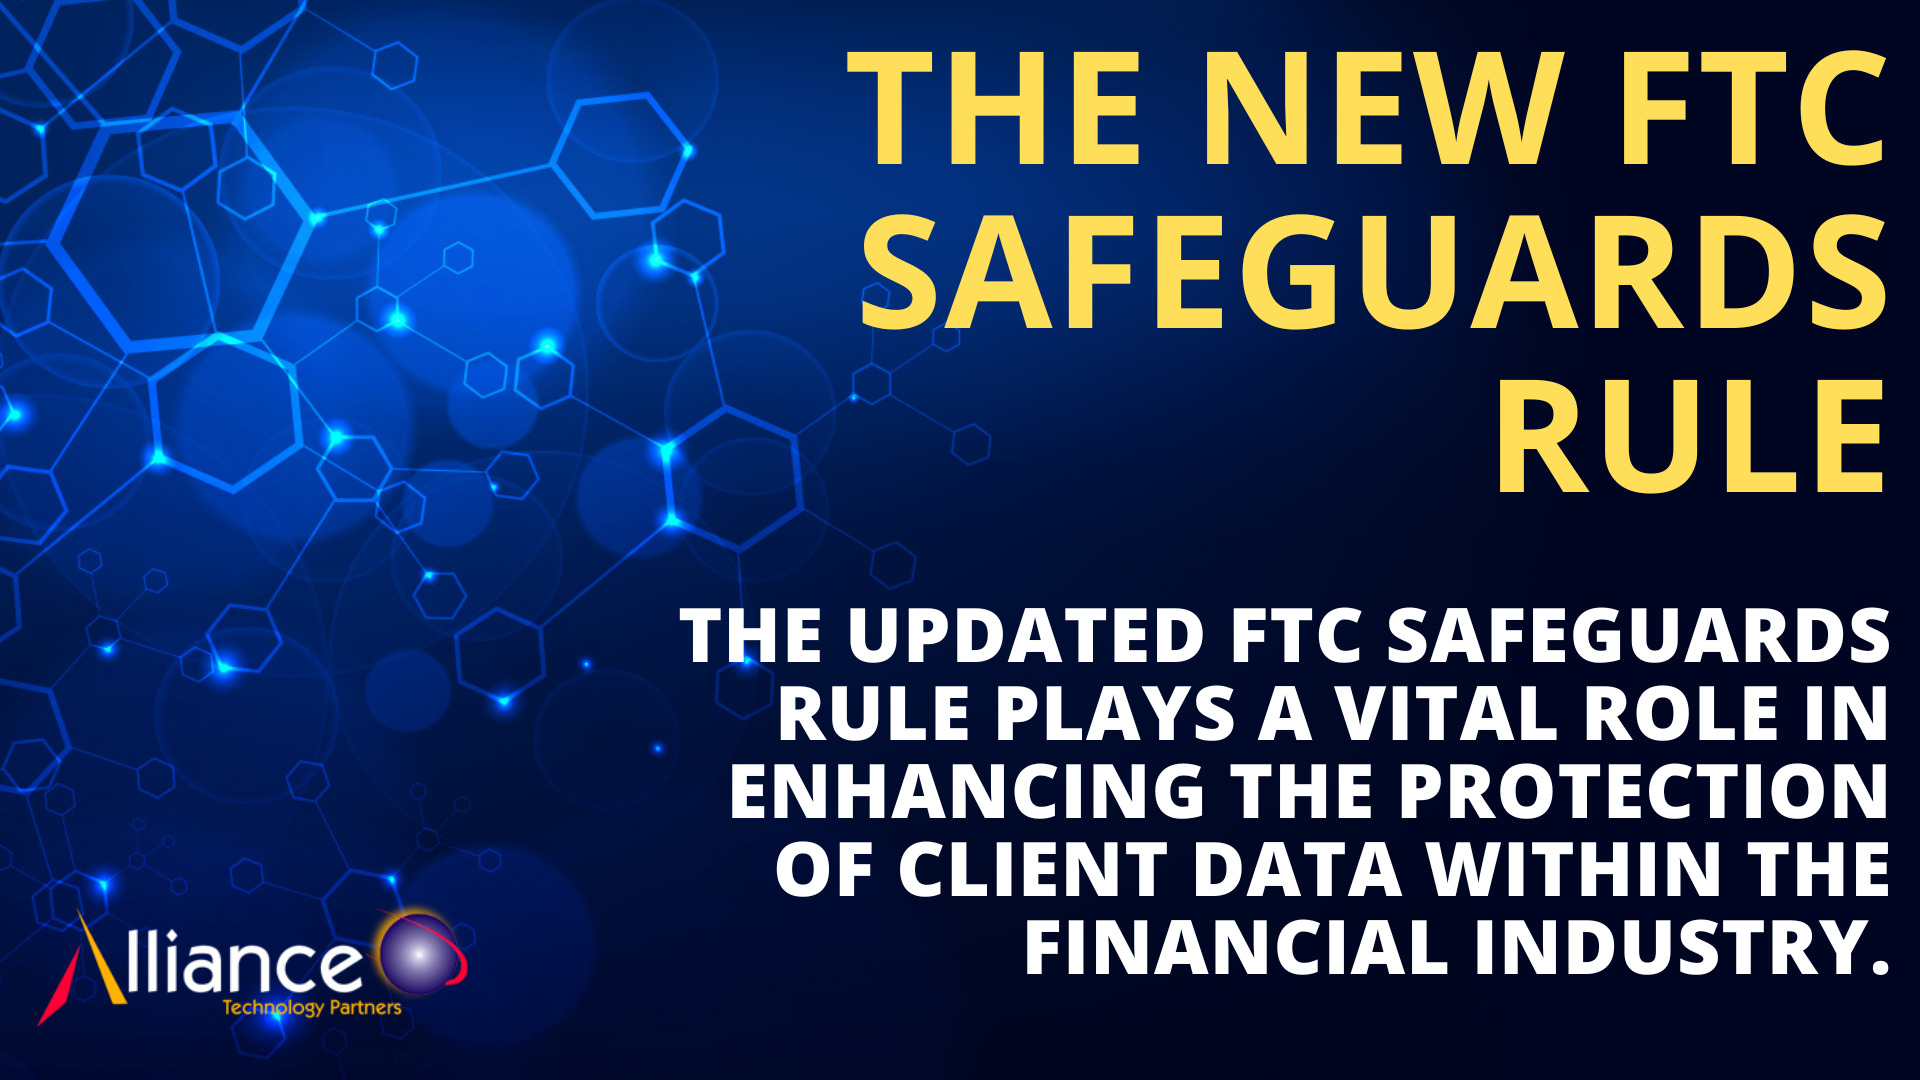 The FTC Safeguards Rule Revamp Will Your Business Survive the Upcoming Shift?